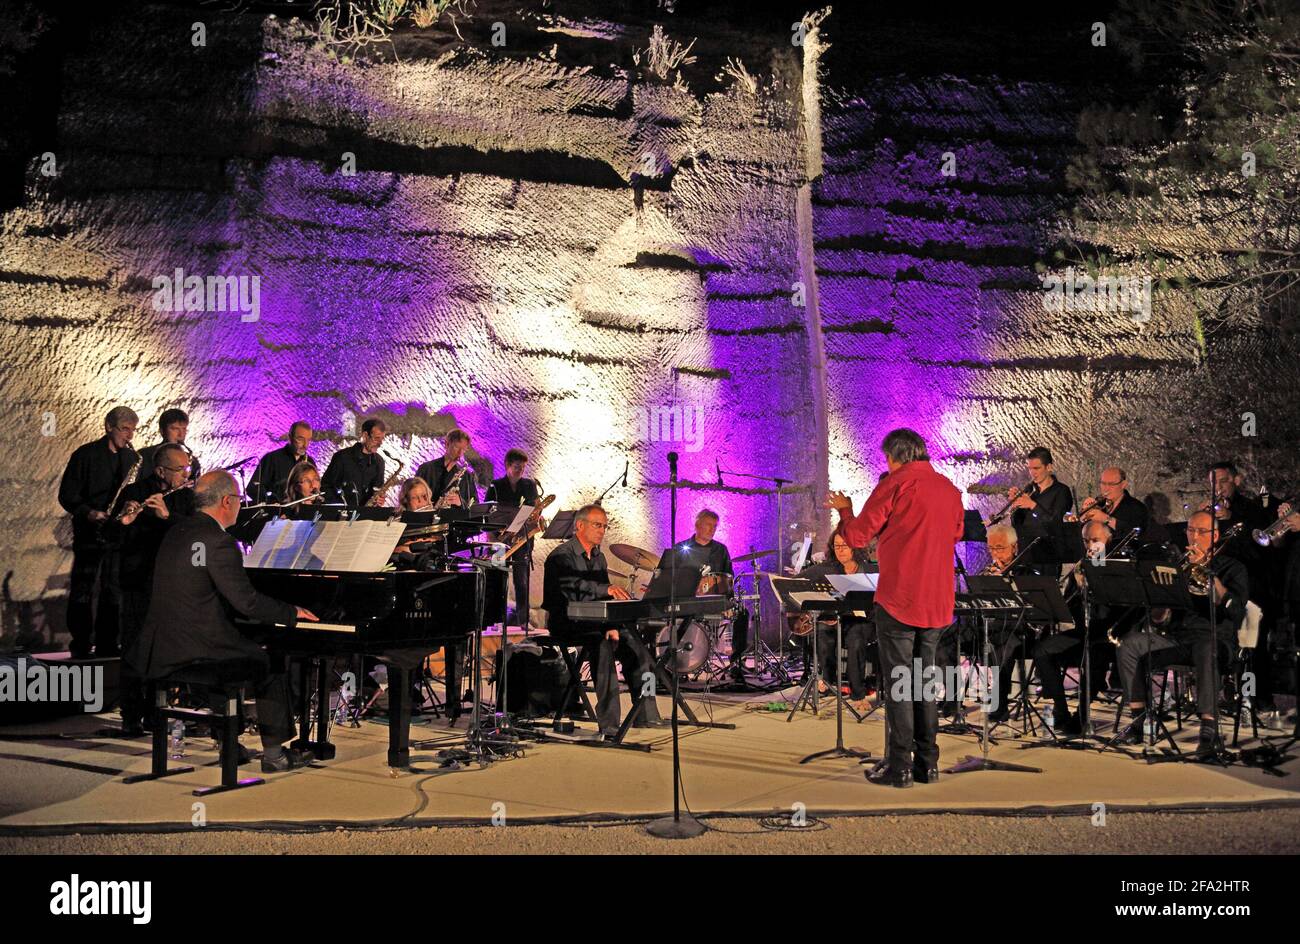 A conductor and Jazz orchestra on stage in the open air Carrieres du Bon Temps, Junas Quarries, Gard, France Stock Photo